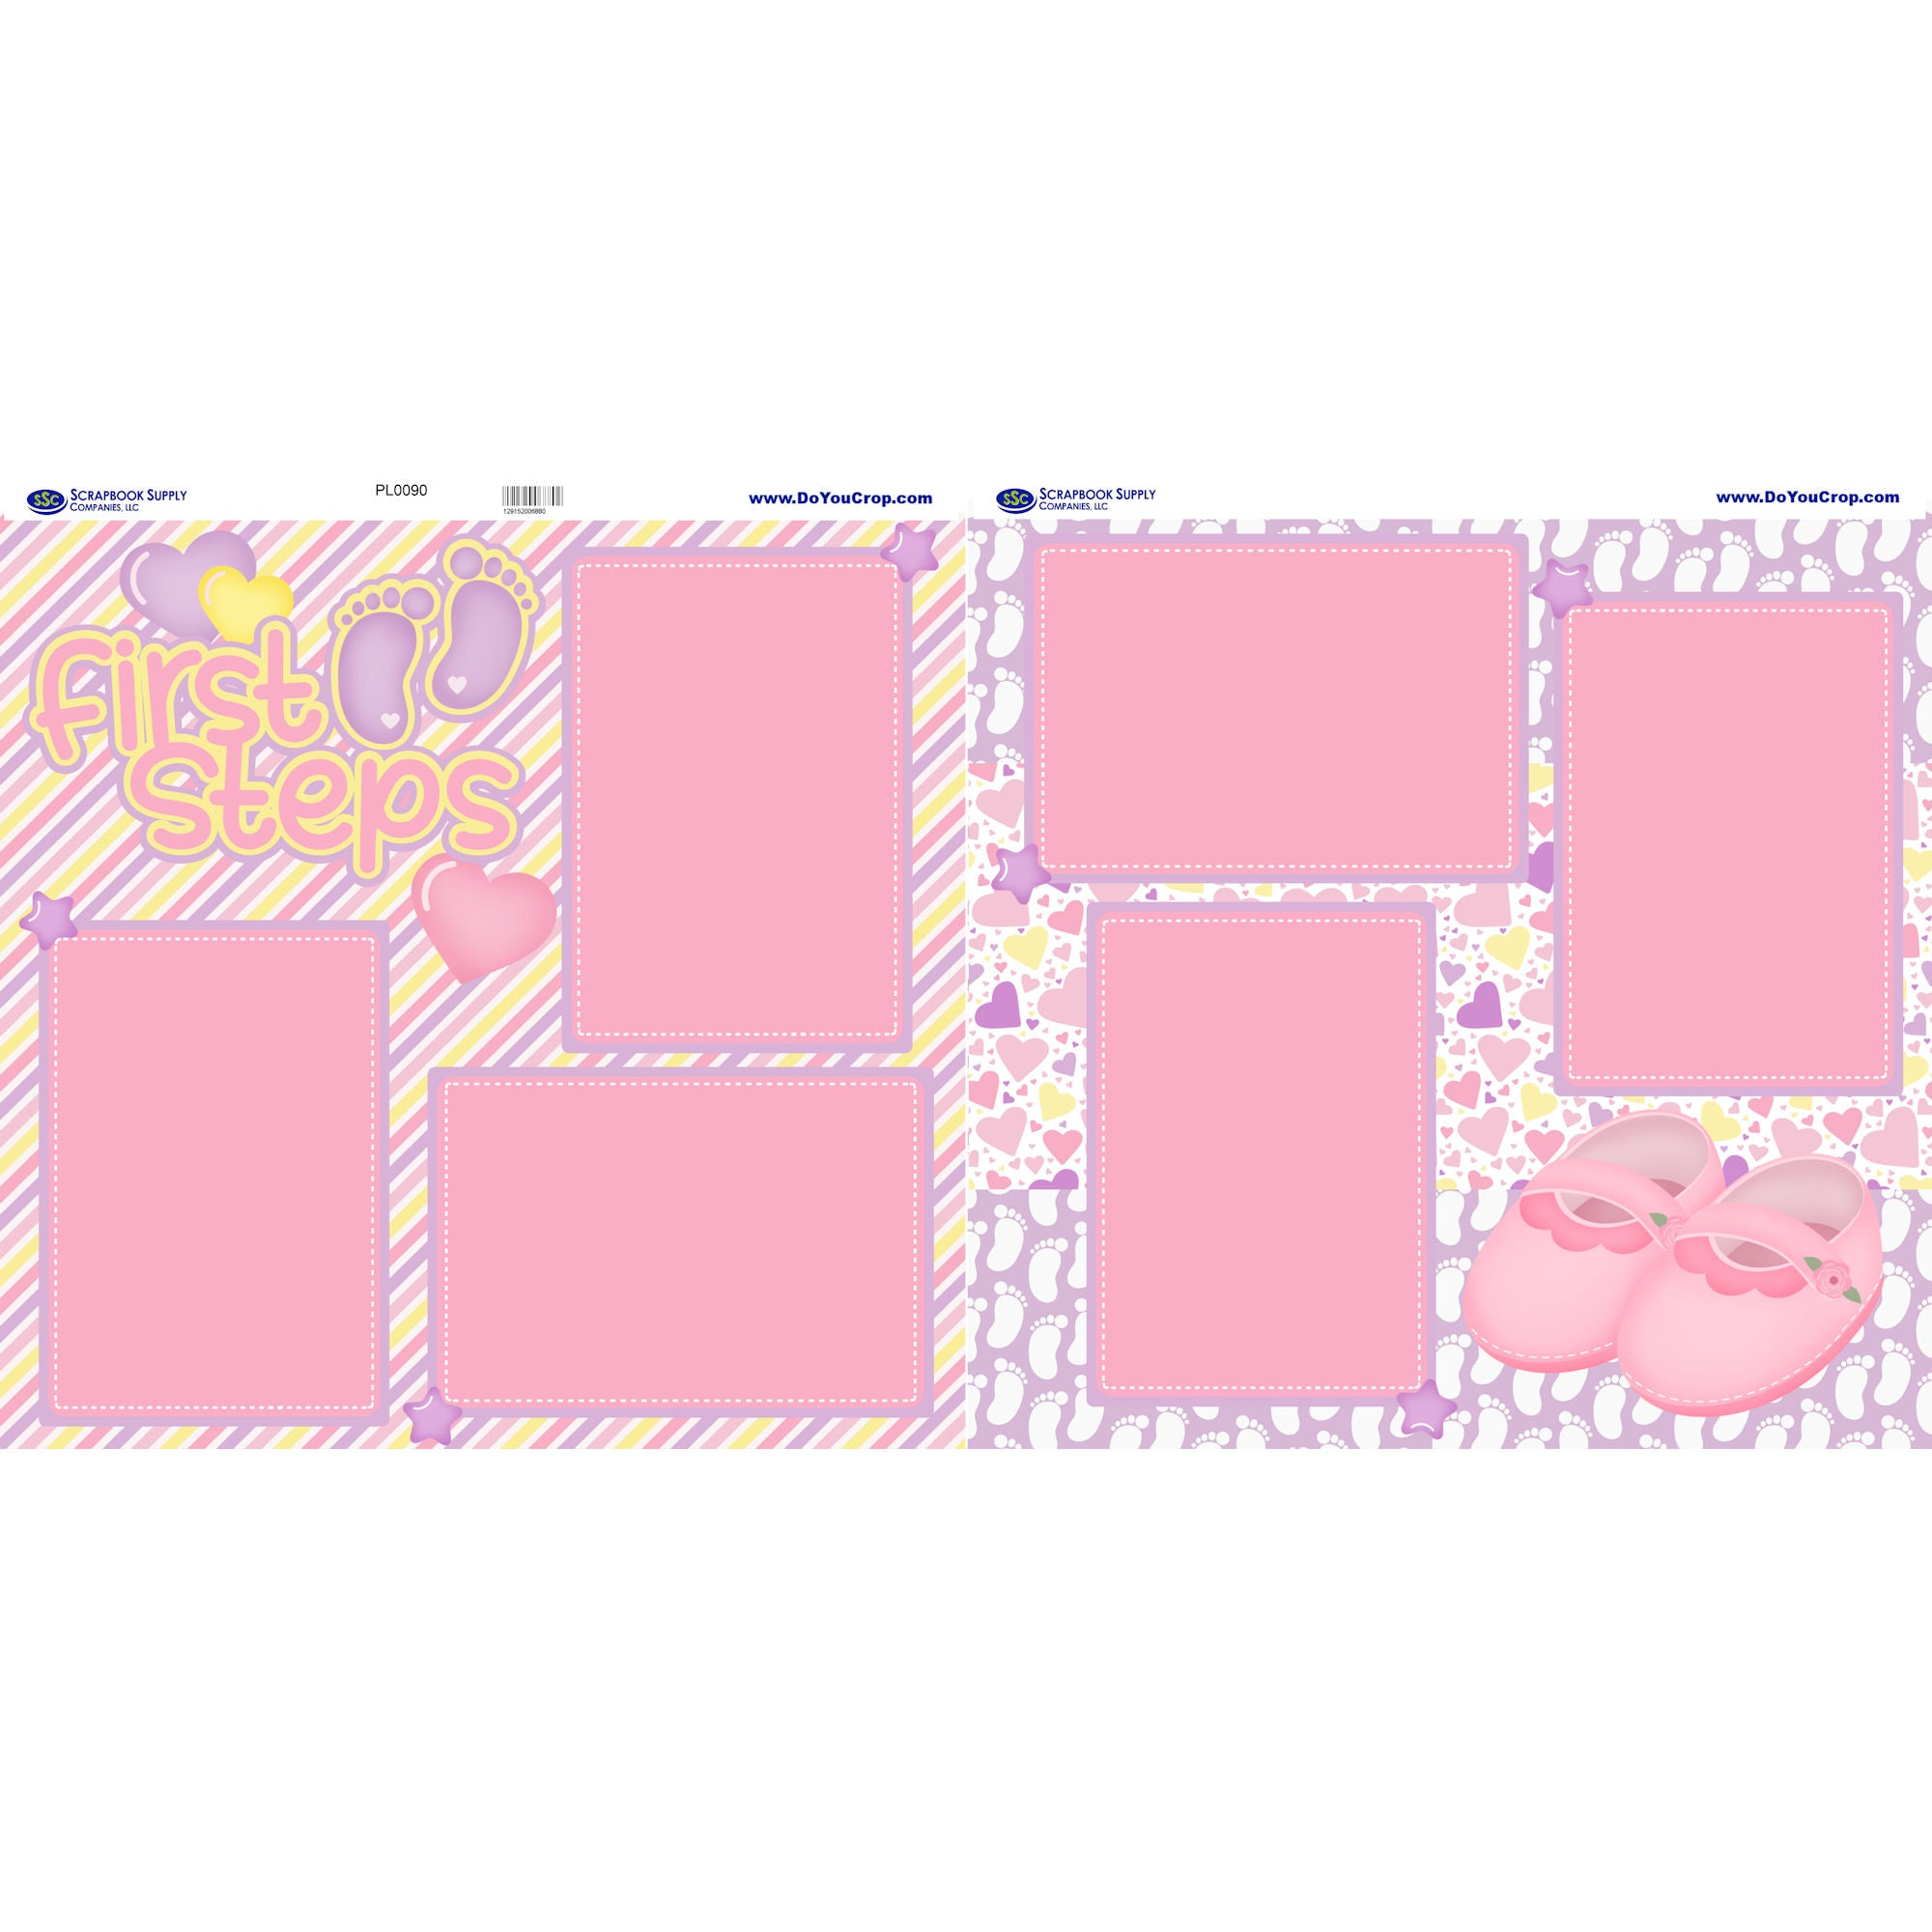 Projects 56-66: New Baby Girl Scrapbook Kit